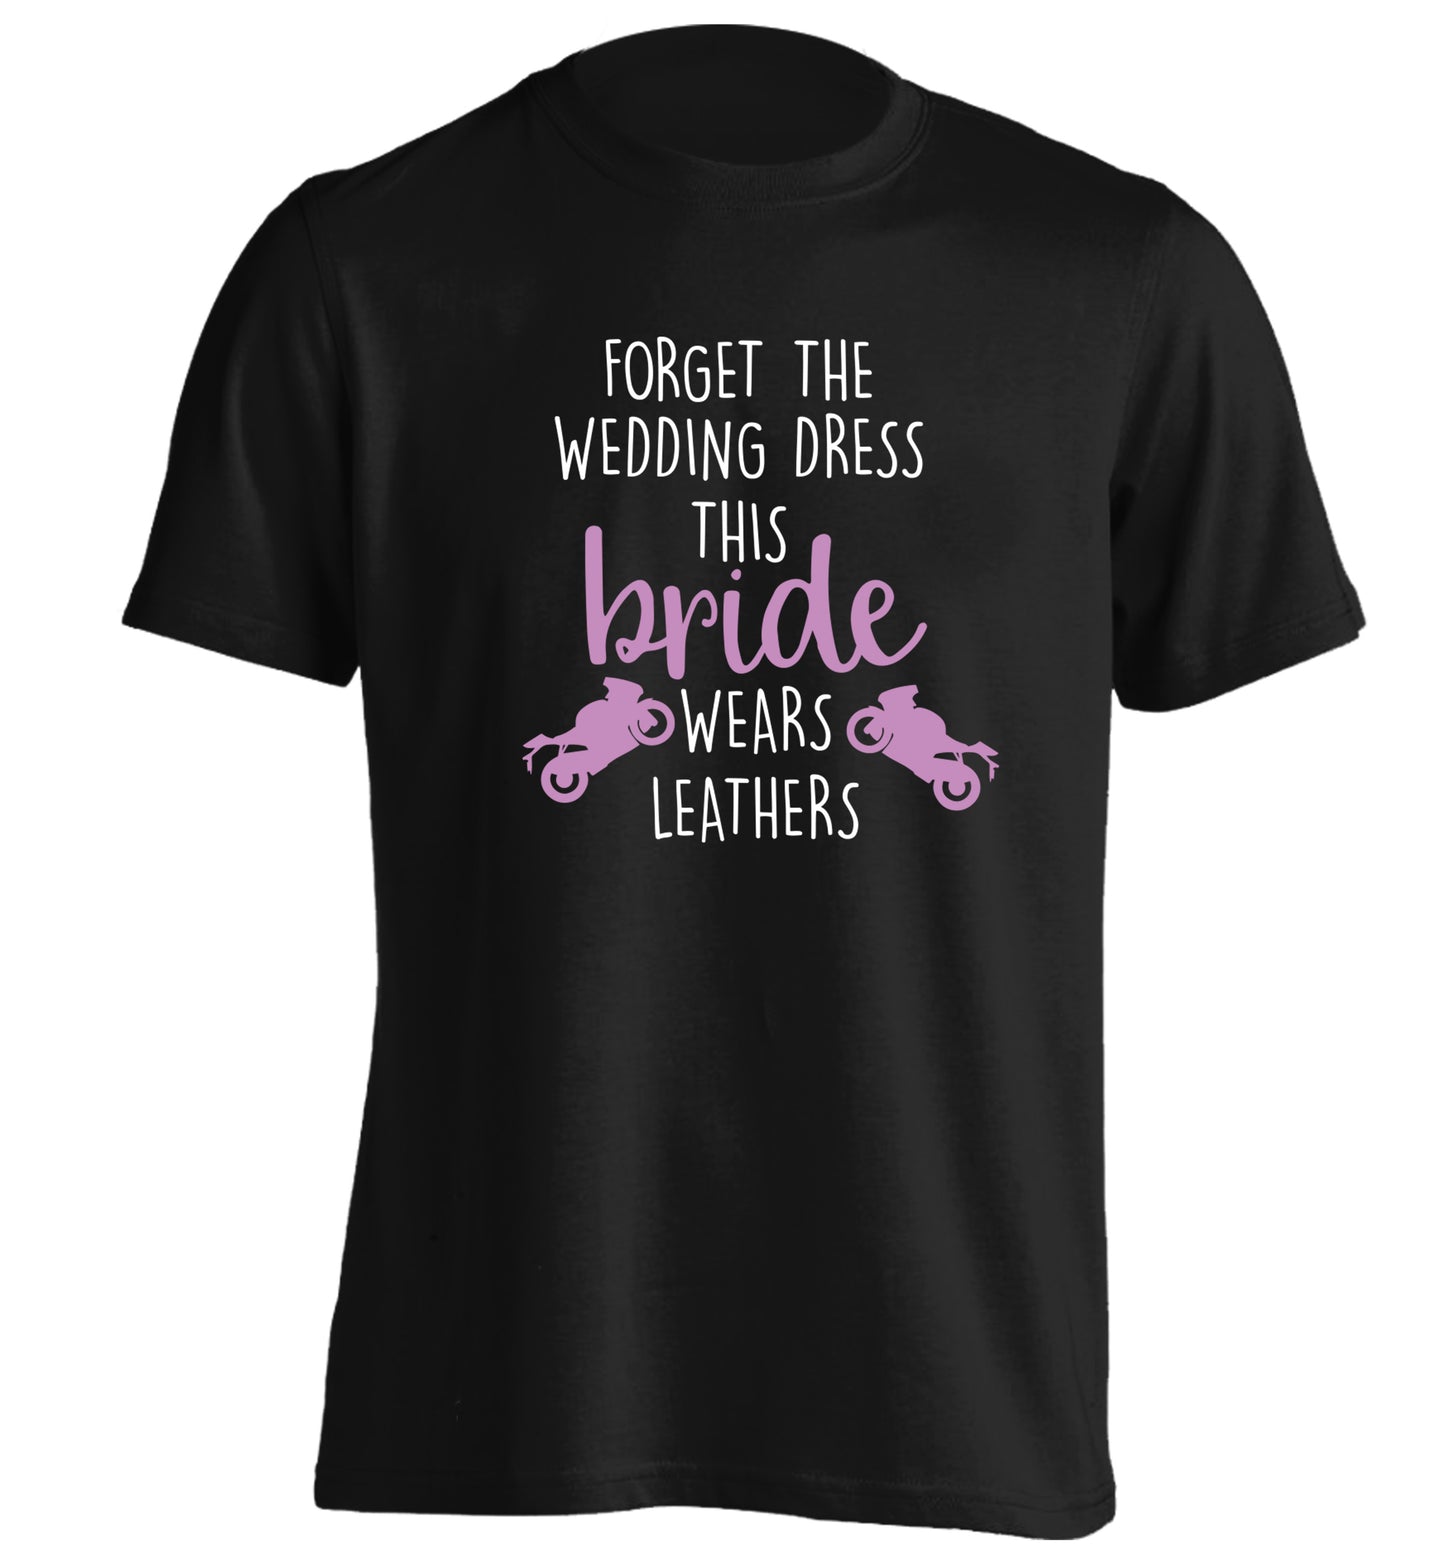 Forget the wedding dress this bride wears leathers adults unisex black Tshirt 2XL